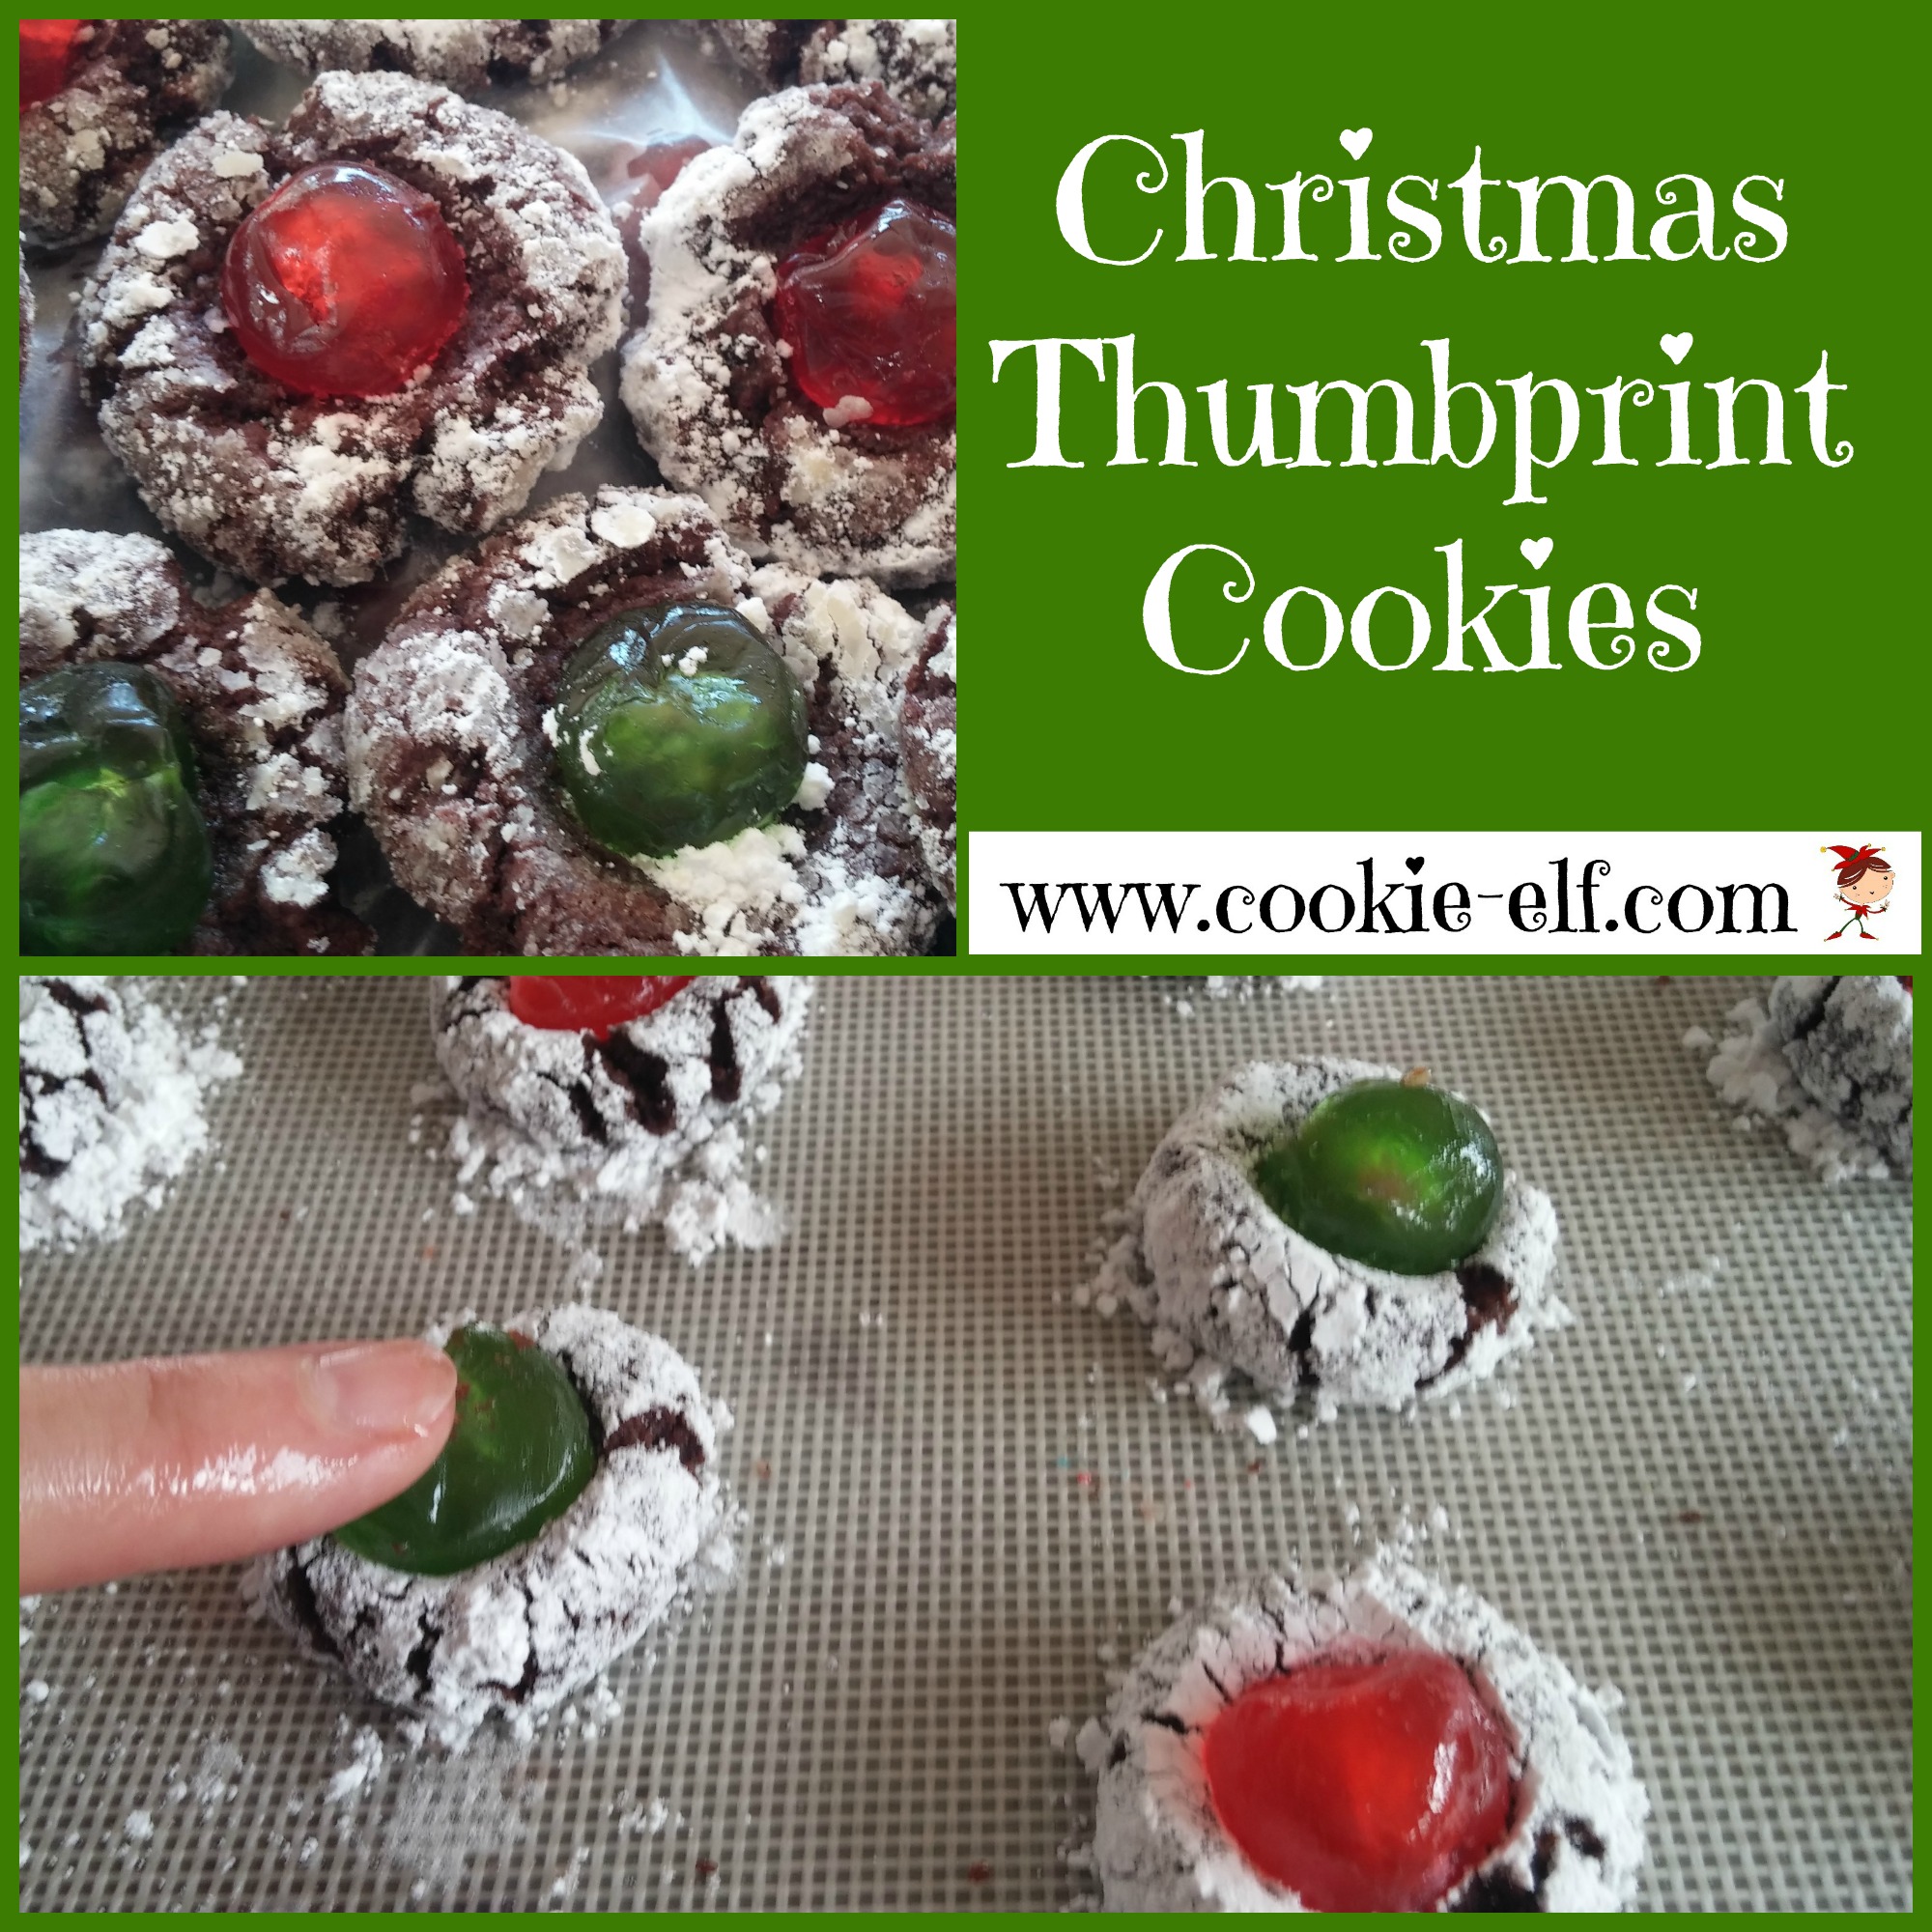 Chocolate Thumbprint Cookies from The Cookie Elf